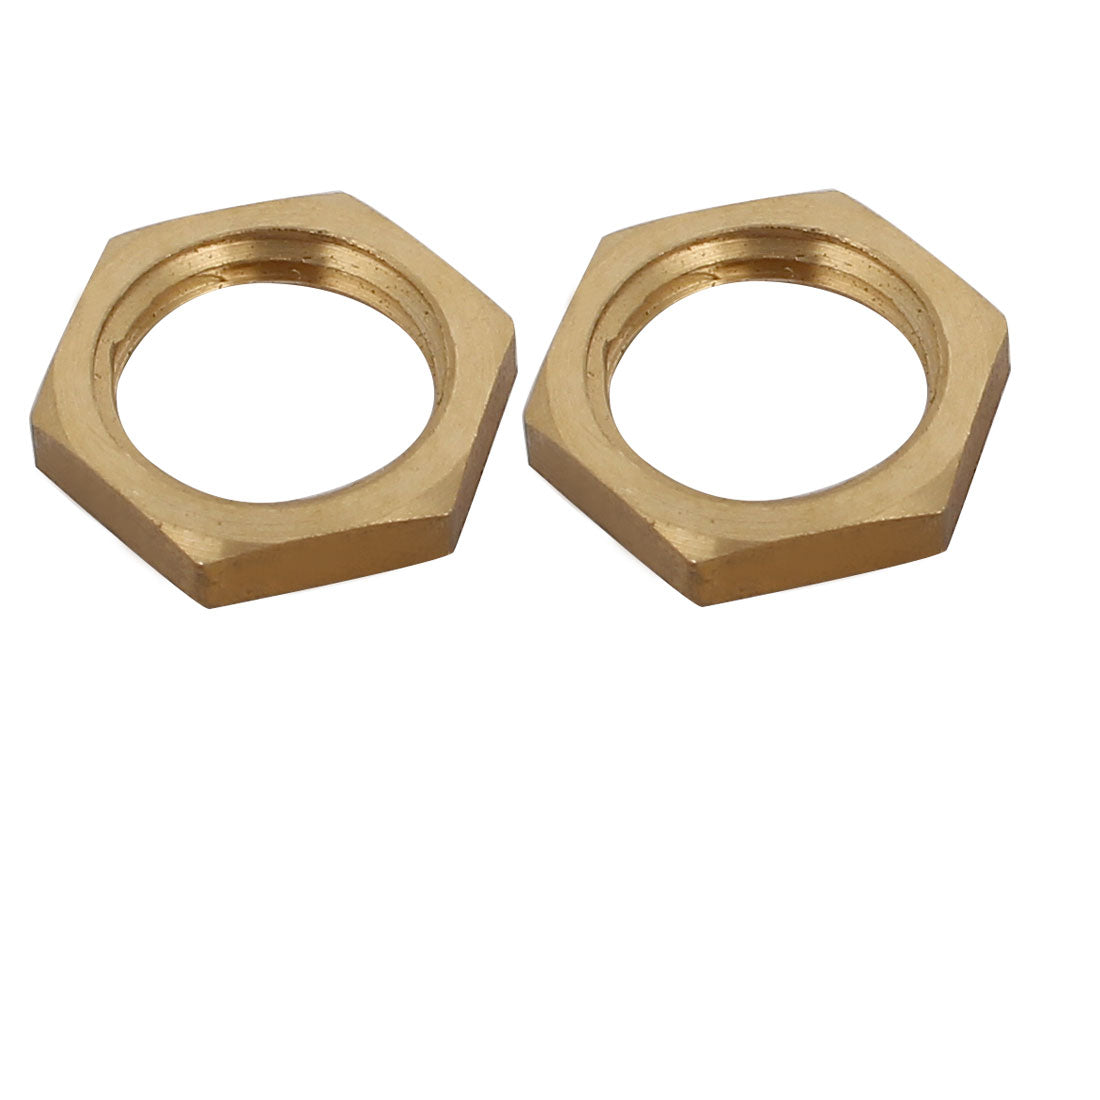 uxcell Uxcell 1/4BSP Female Thread Brass Pipe Fitting Hex Lock Nut 2pcs